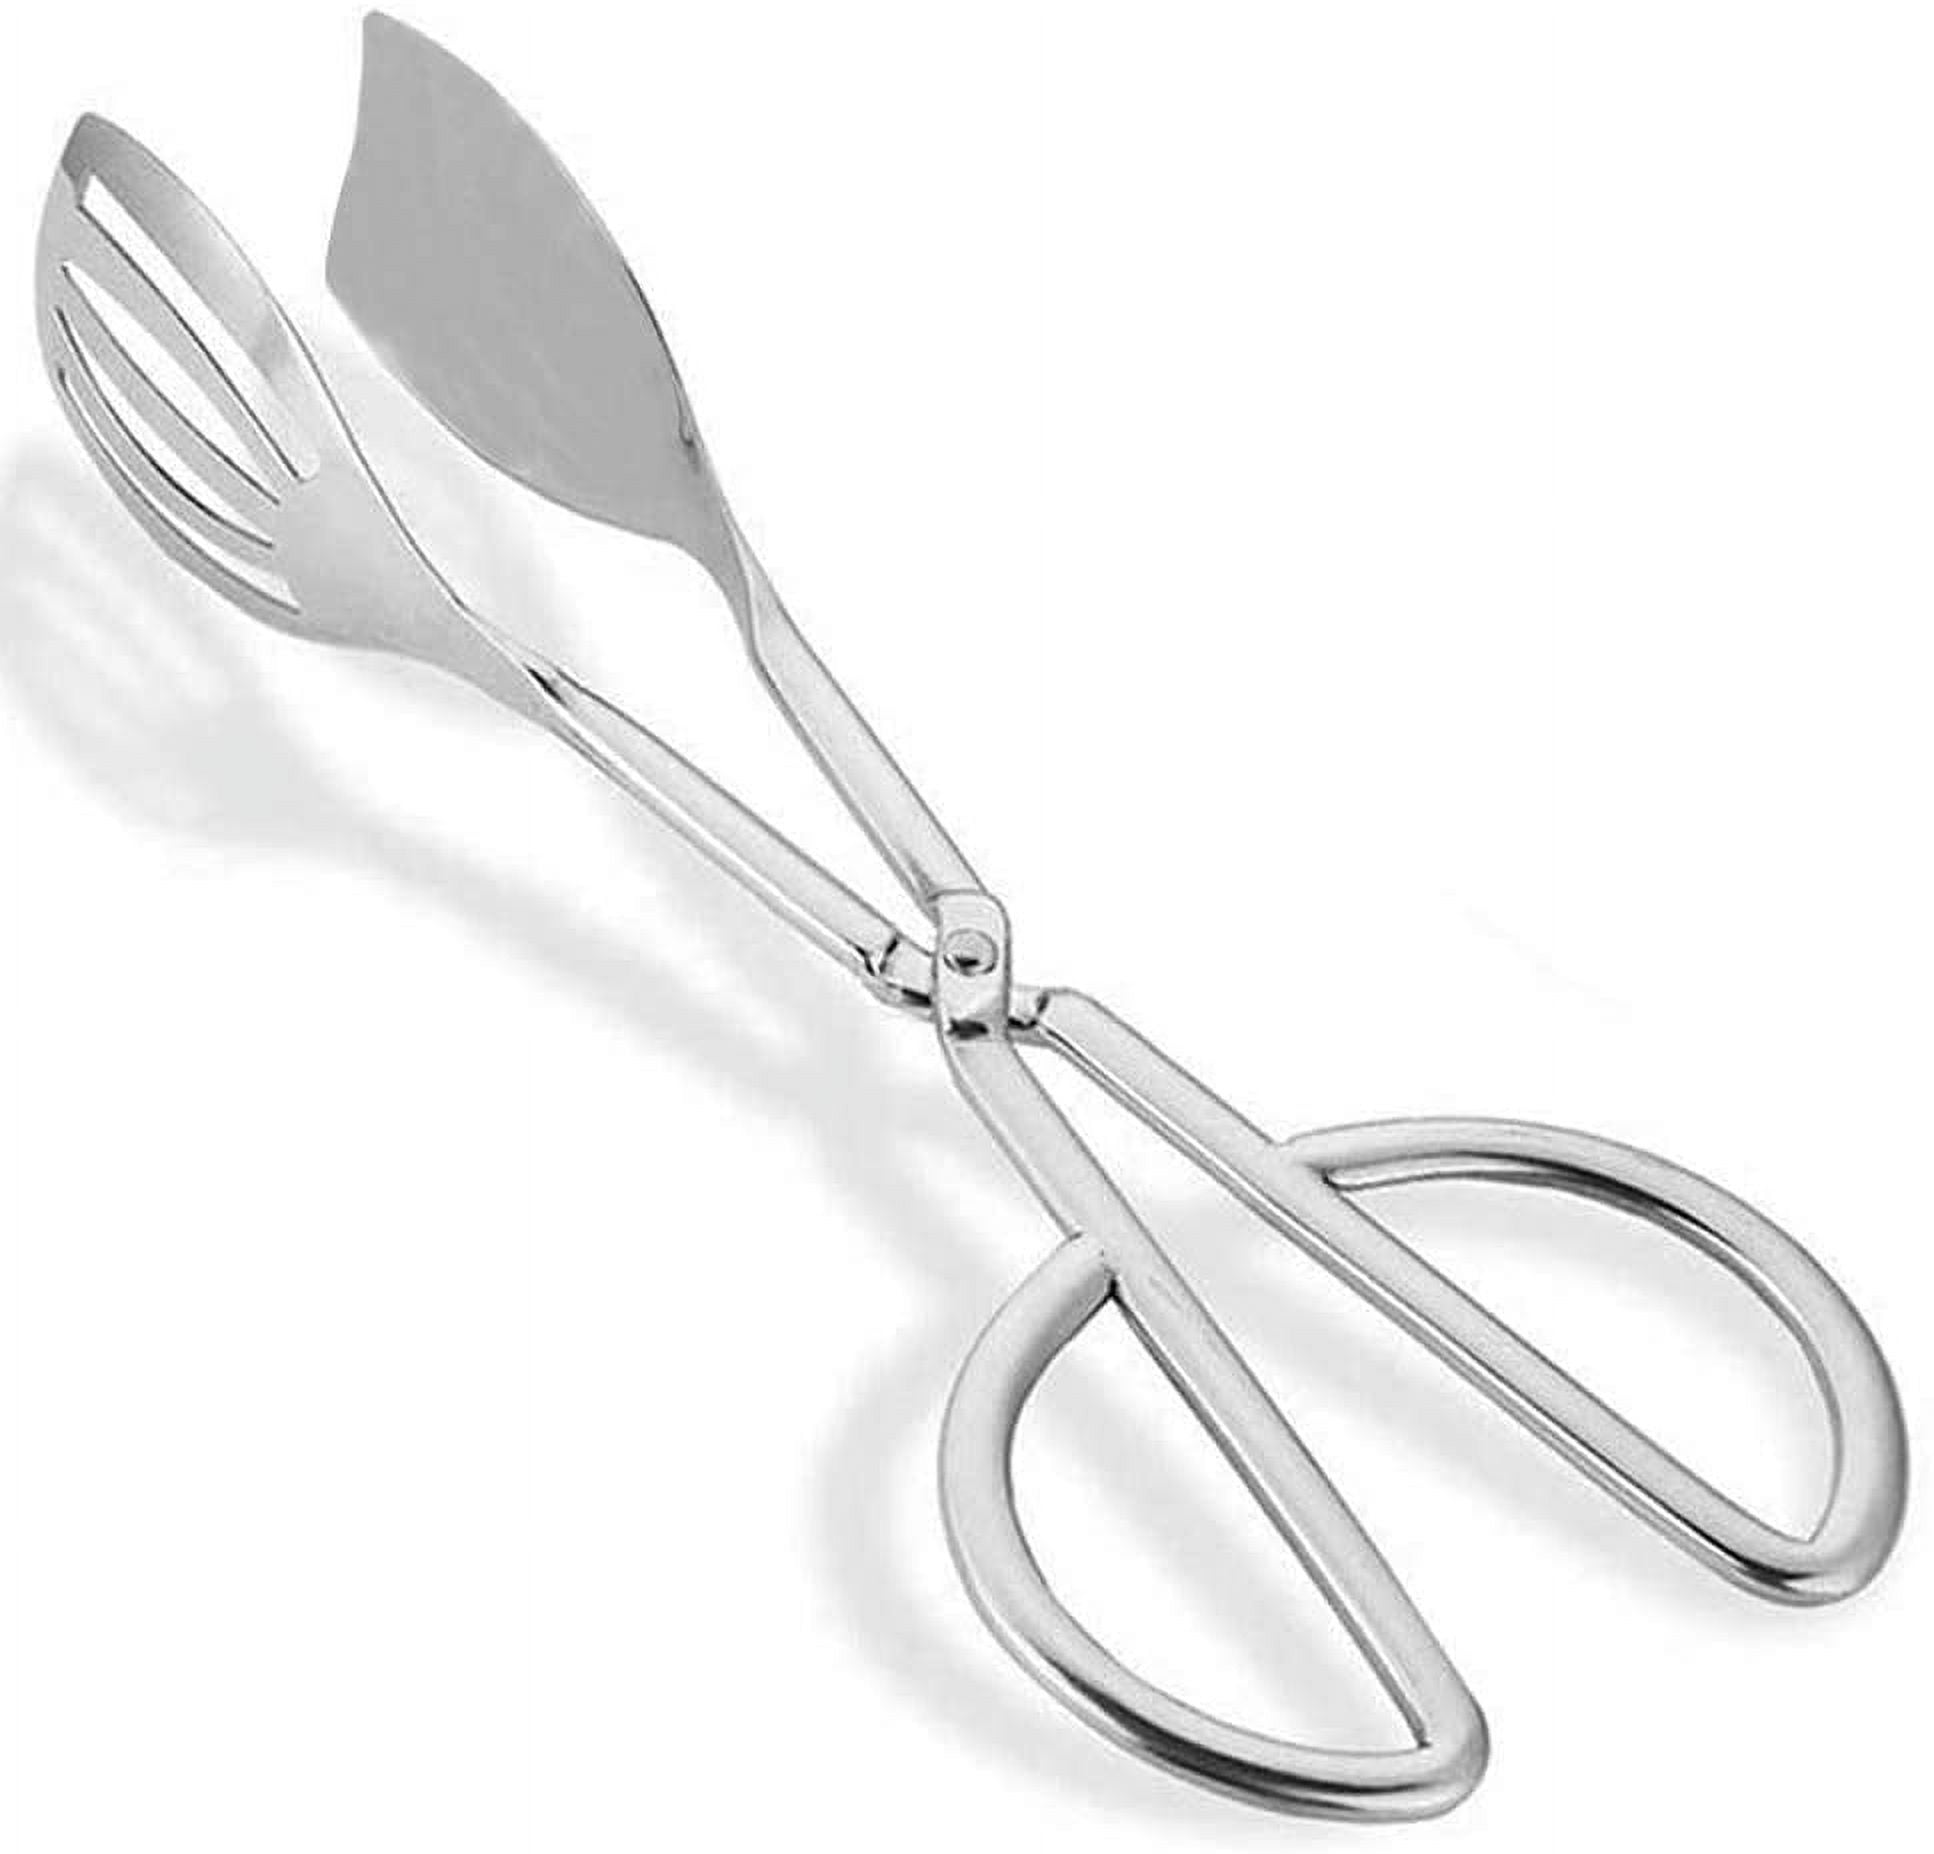 Stainless Steel Salad Tongs Serving Cooking Kitchen Utensil Tong BBQ 3  Sizesﻬ